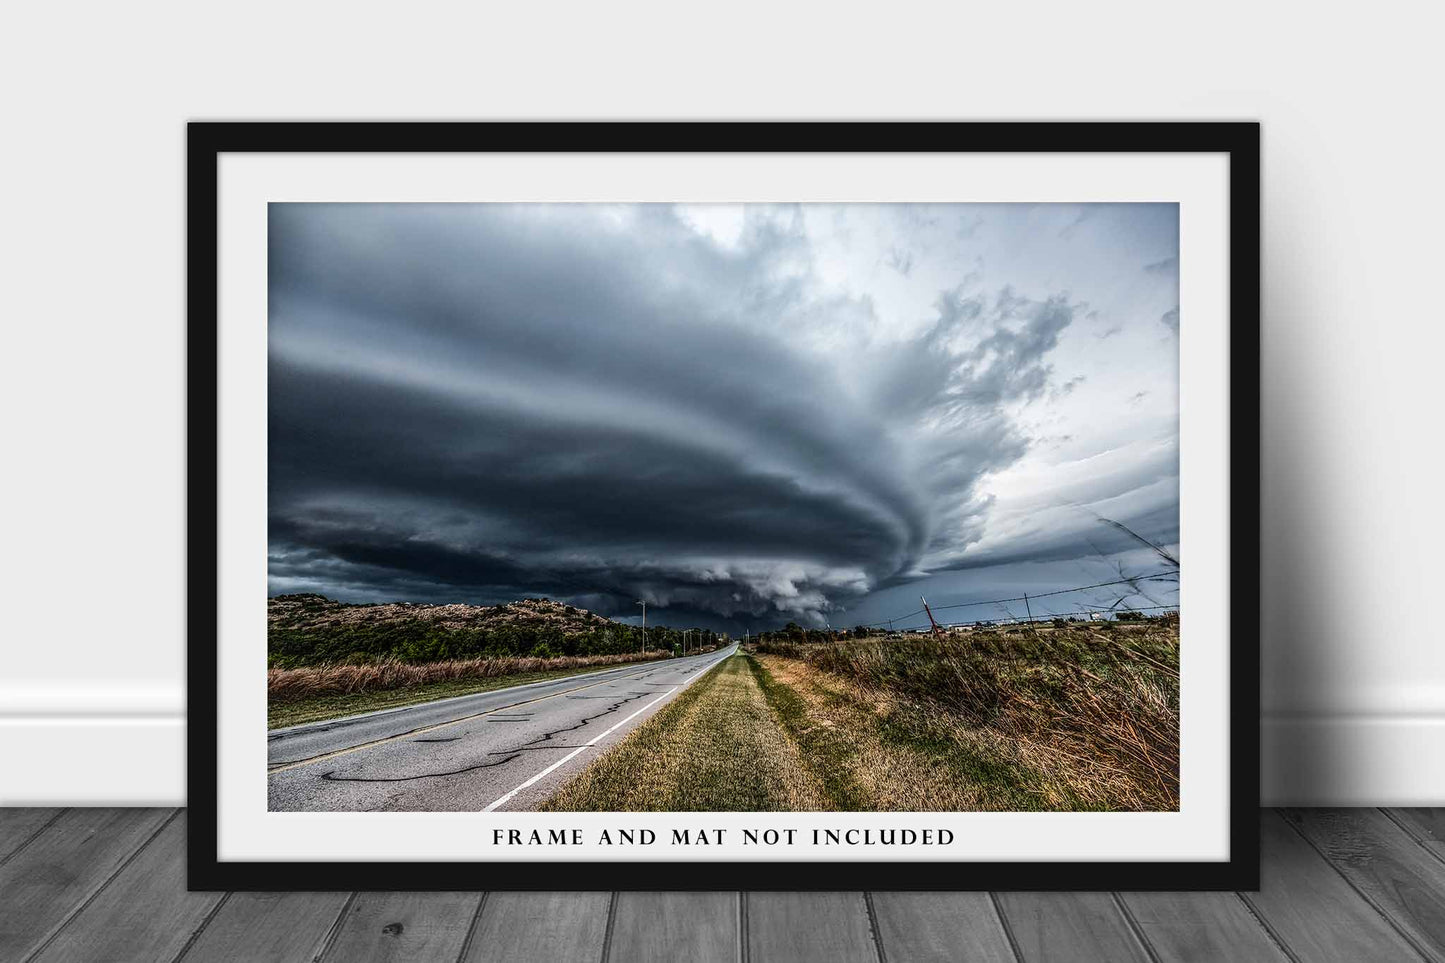 Storm Photography Print - Picture of Mothership Supercell Advancing Over Southern Oklahoma Plains in Autumn Scenic Weather Decor